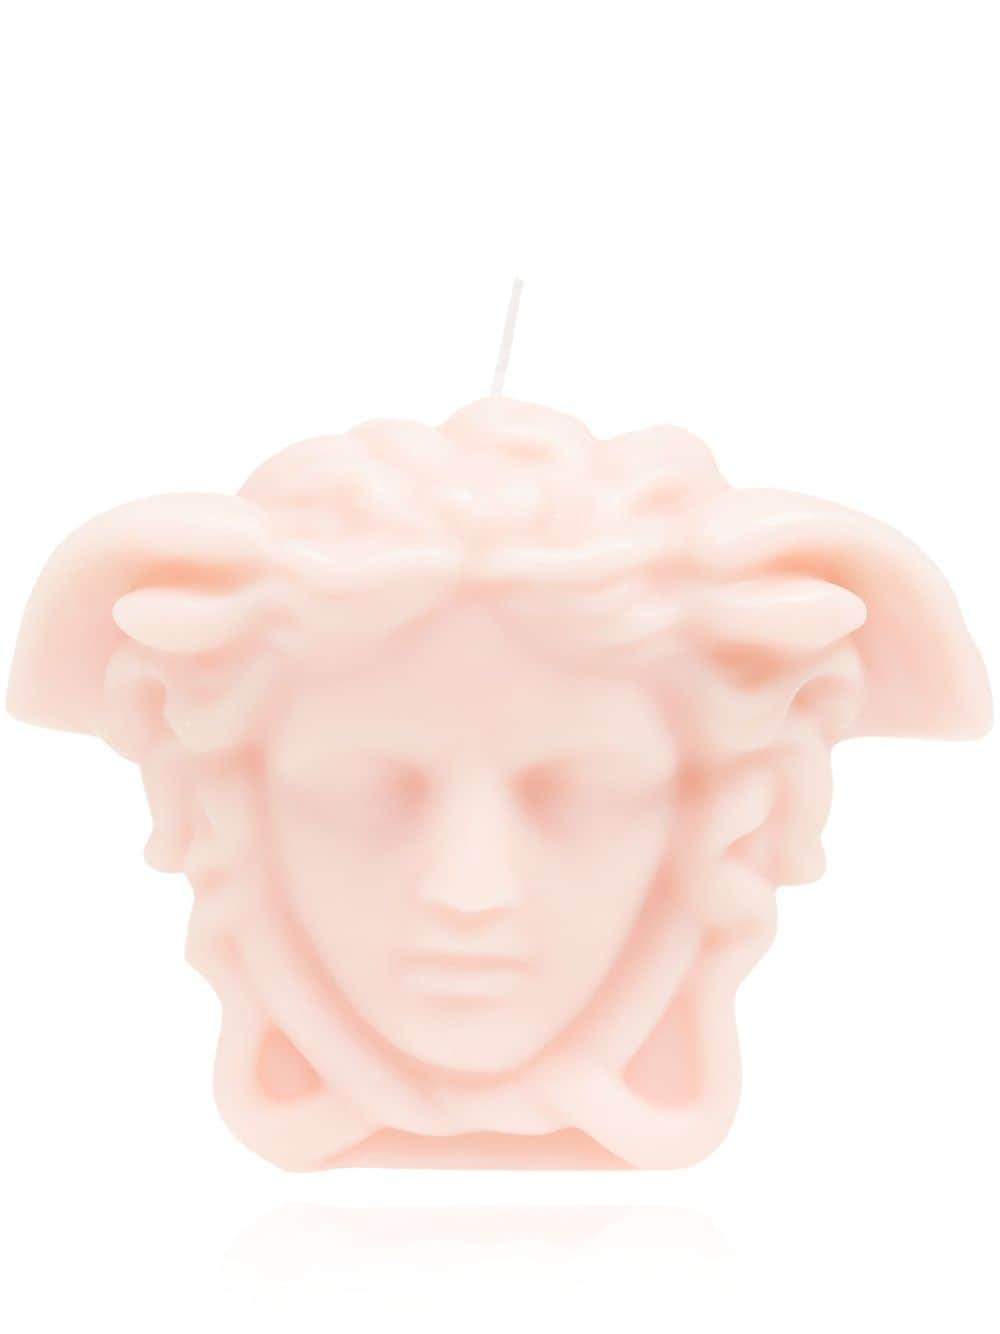 Versace Small Medusa Head Candle (590g) In Brown